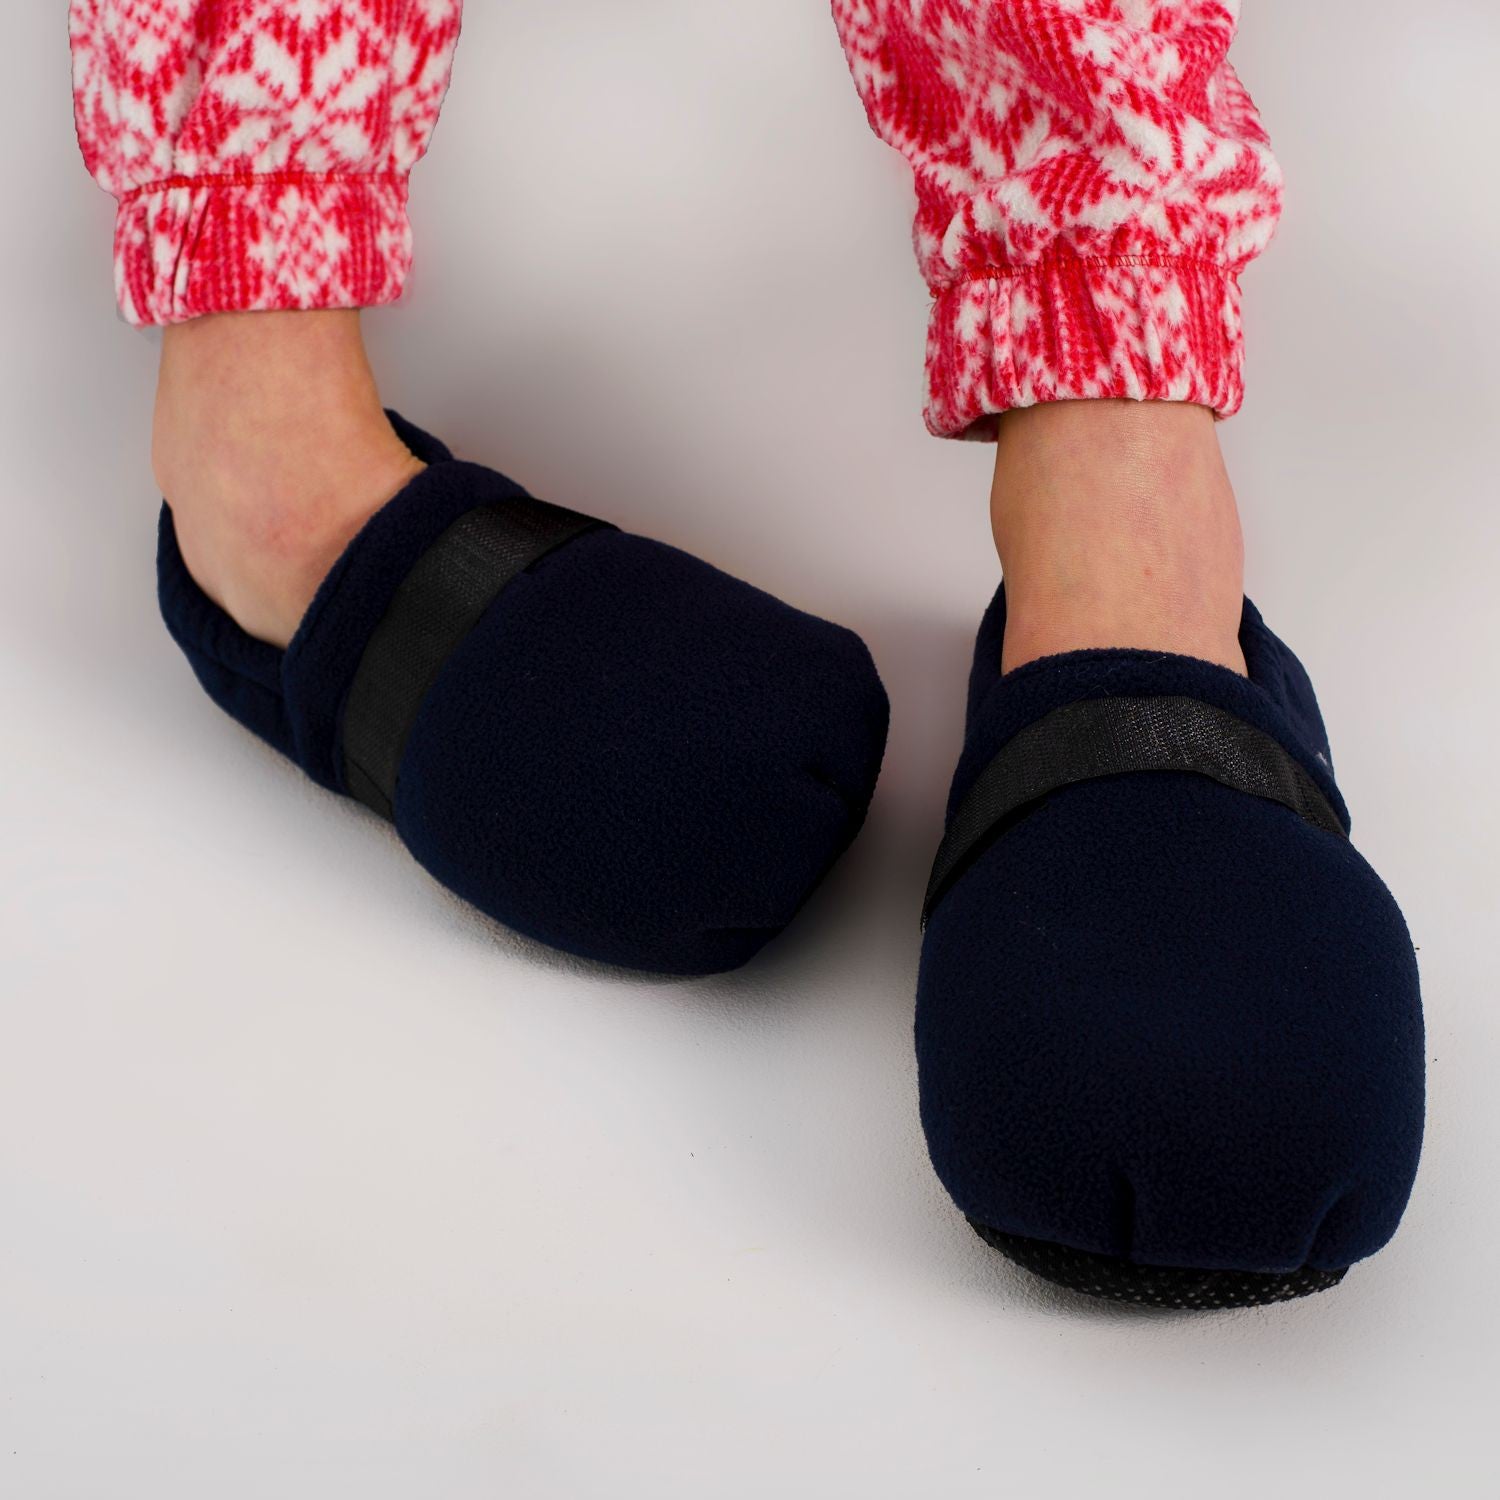 Zhu-Zhu Cozy Toes Microwavable Slippers